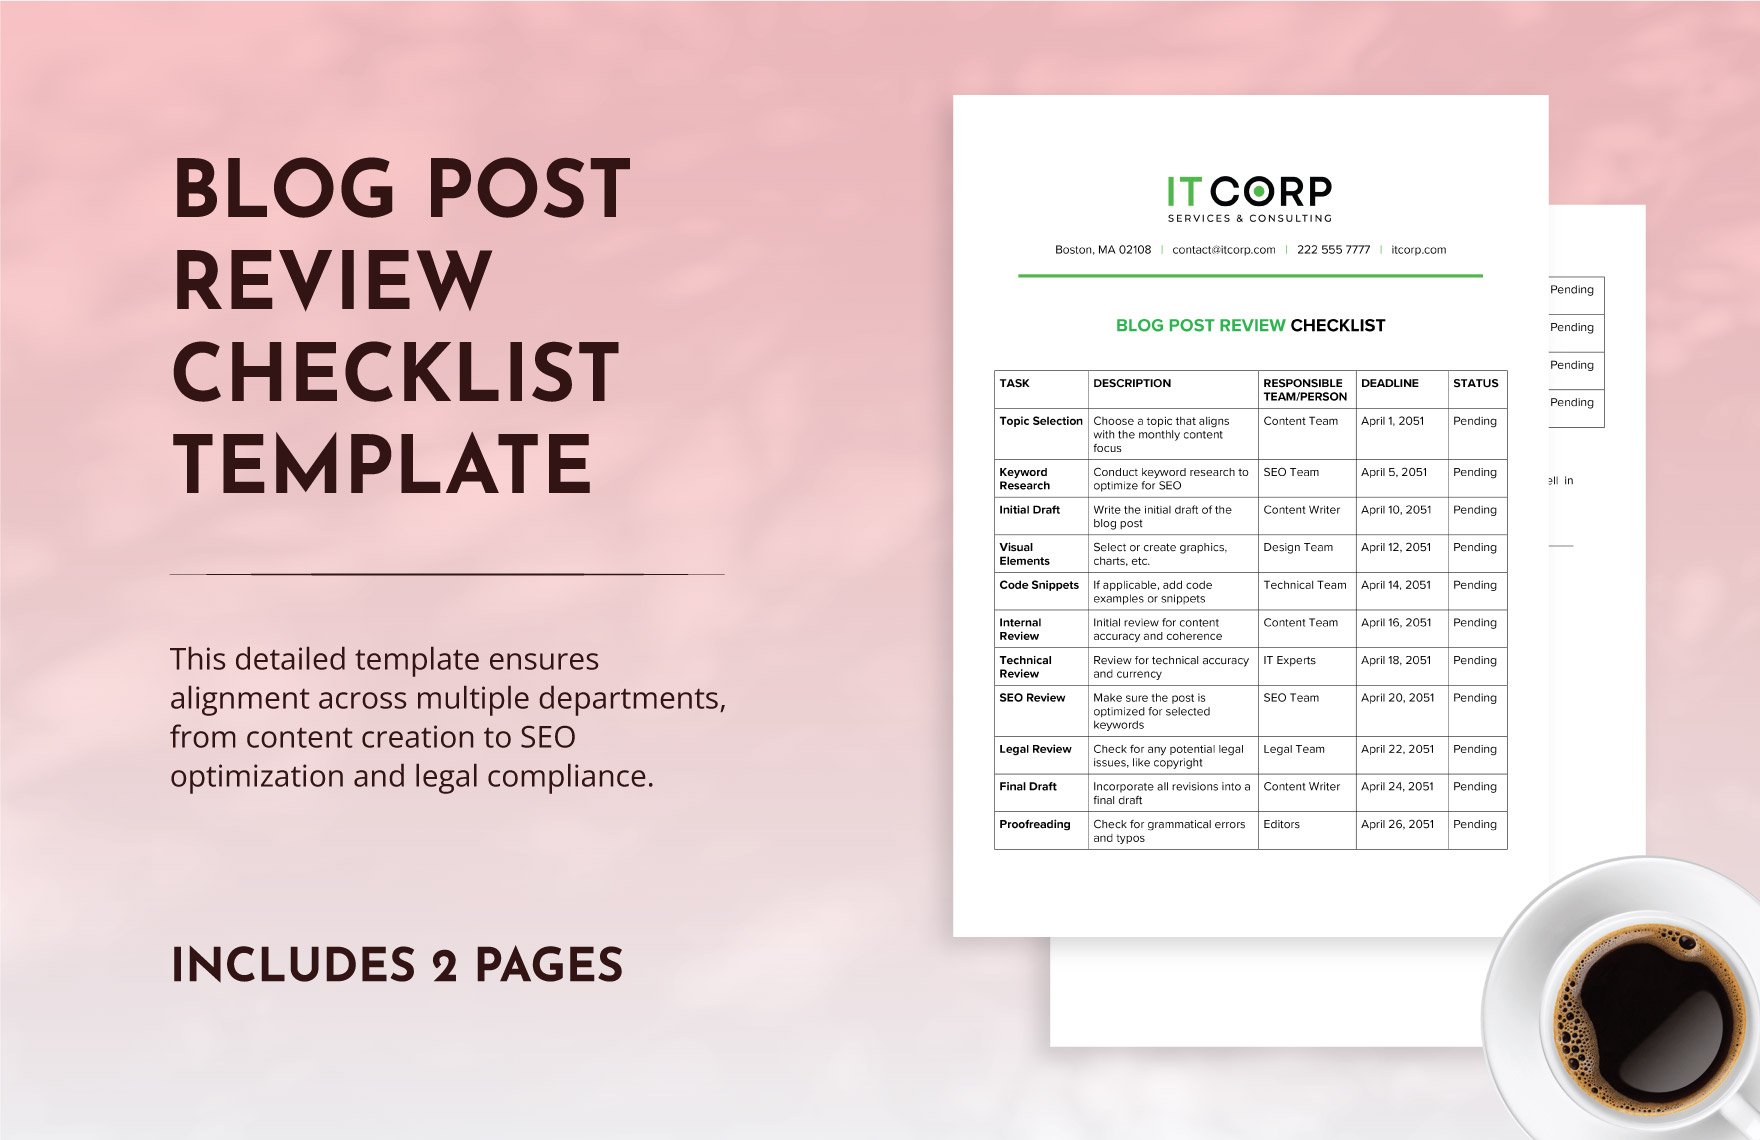 Blog Post Review Checklist Template in Word, Google Docs, PDF